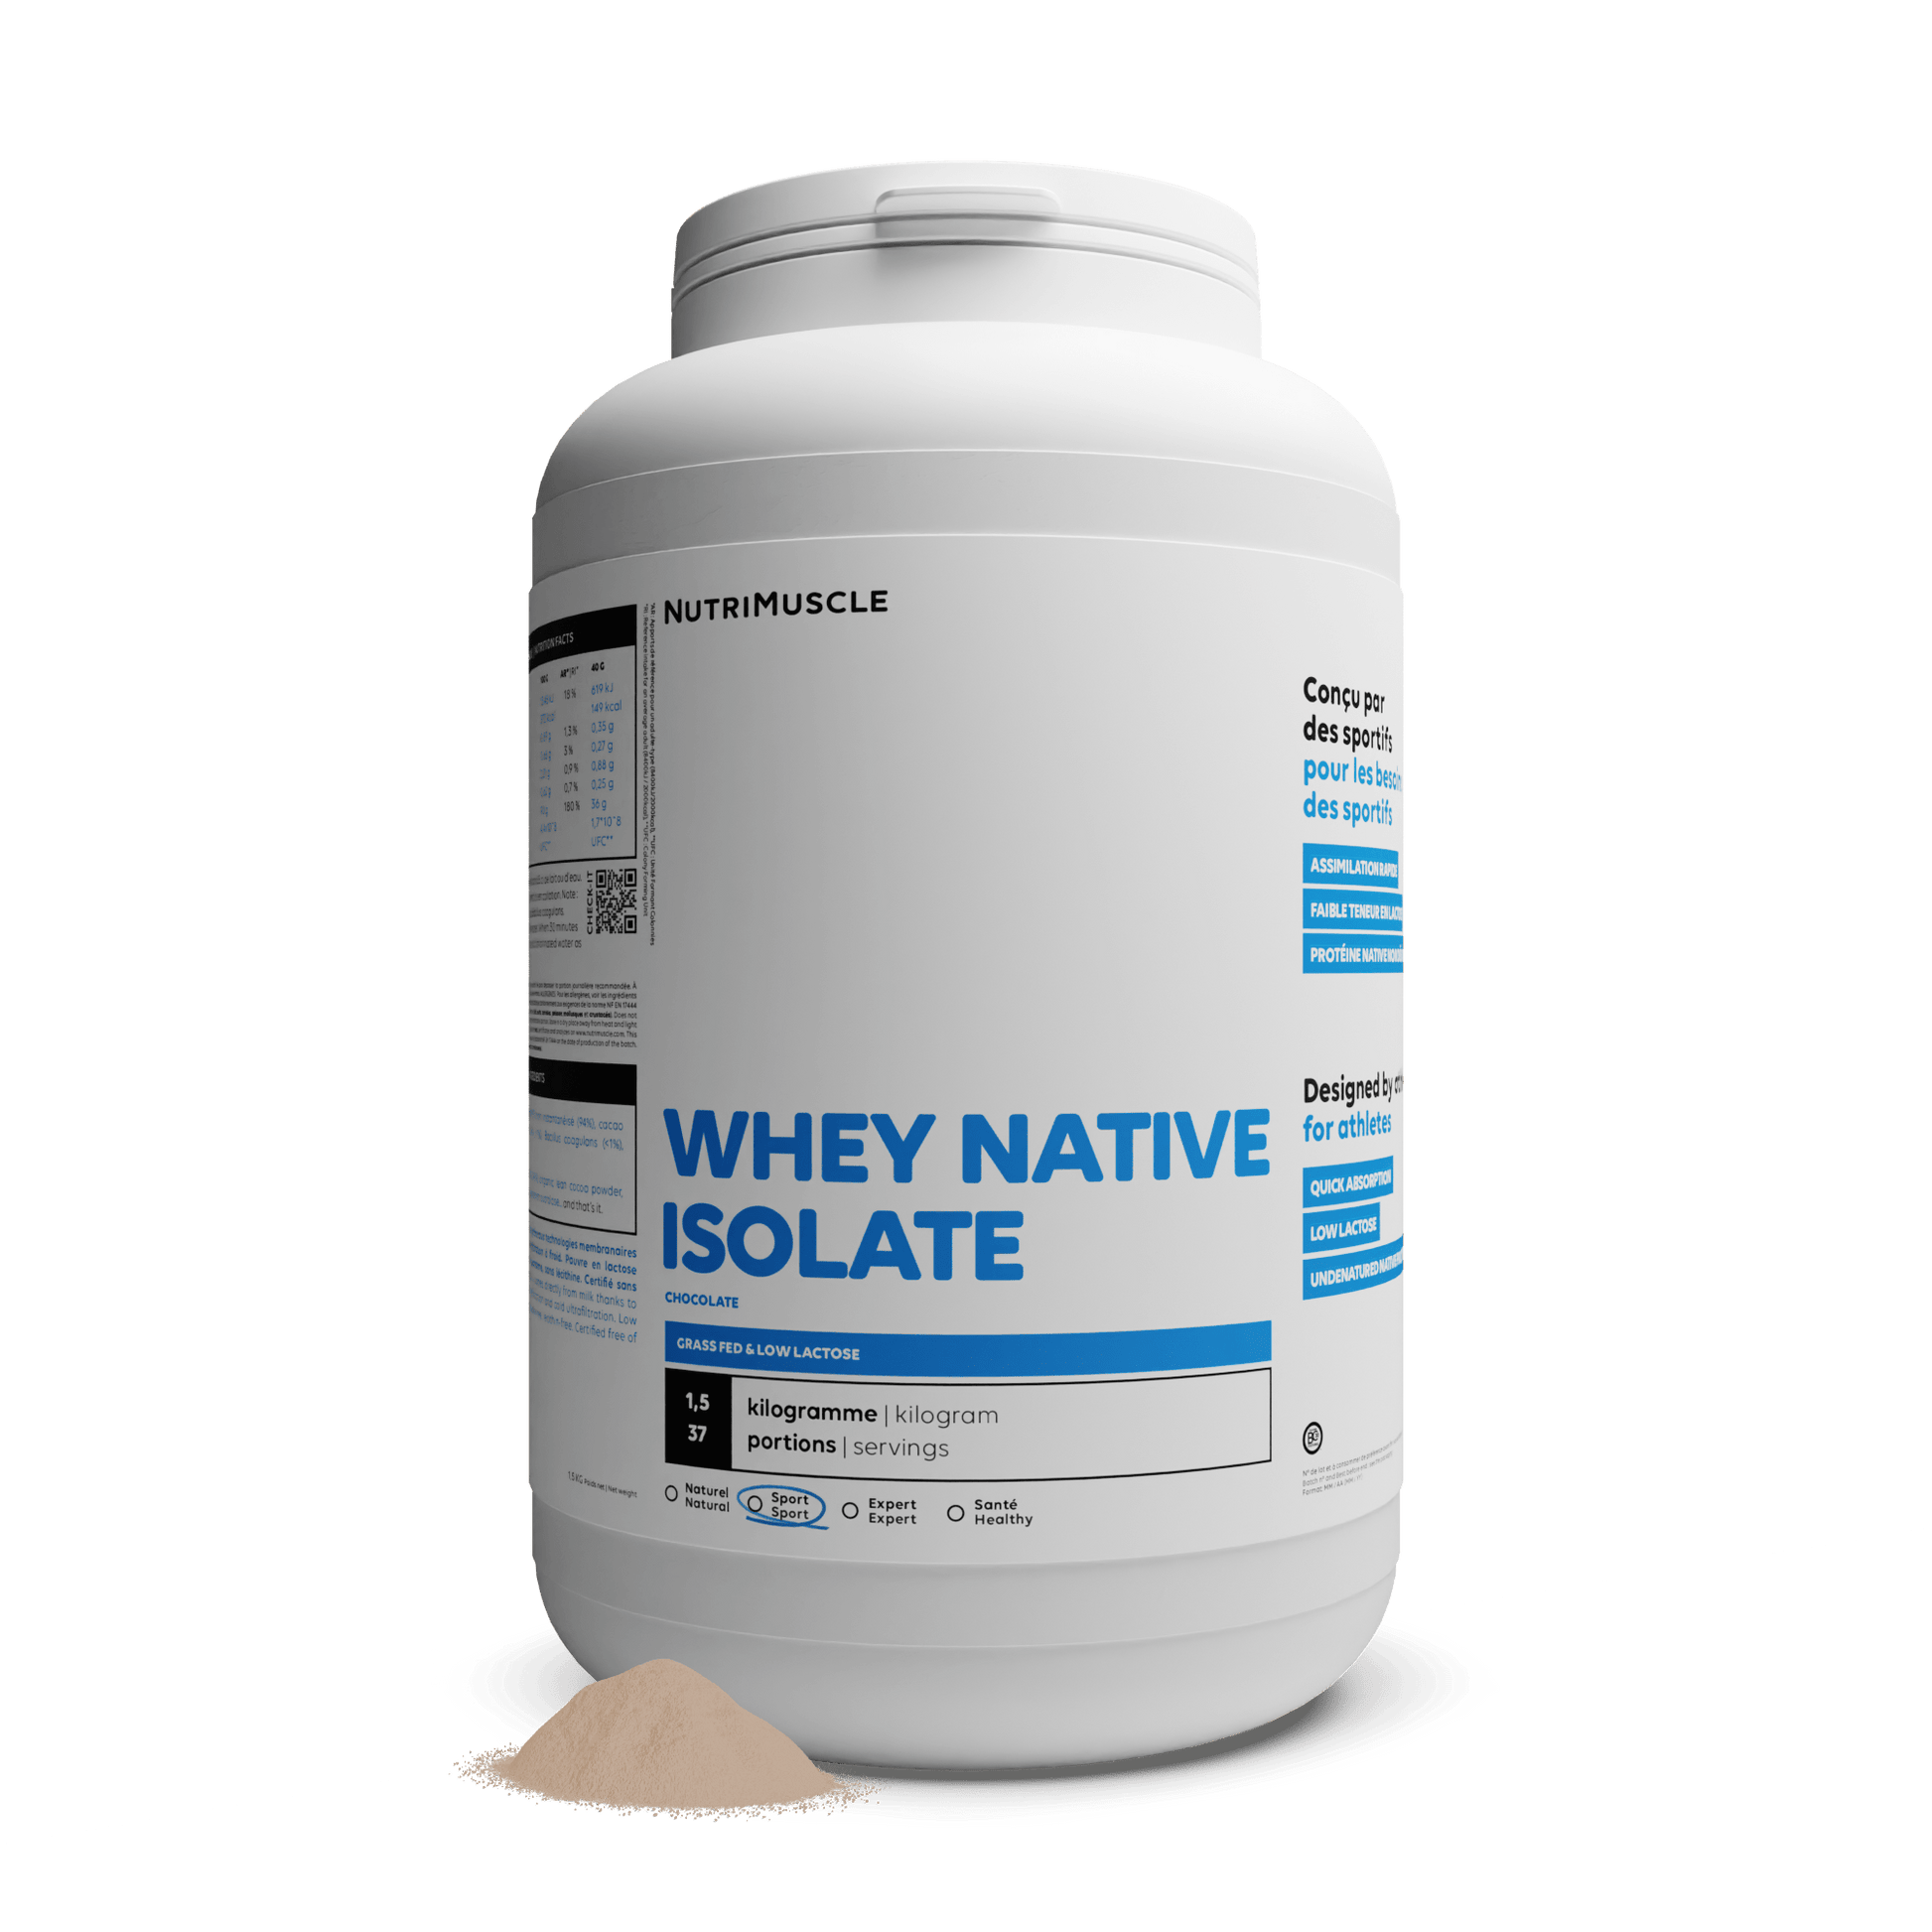 Nutrimuscle Protéines Chocolat / 1.50 kg Whey Native Isolate (Low lactose)